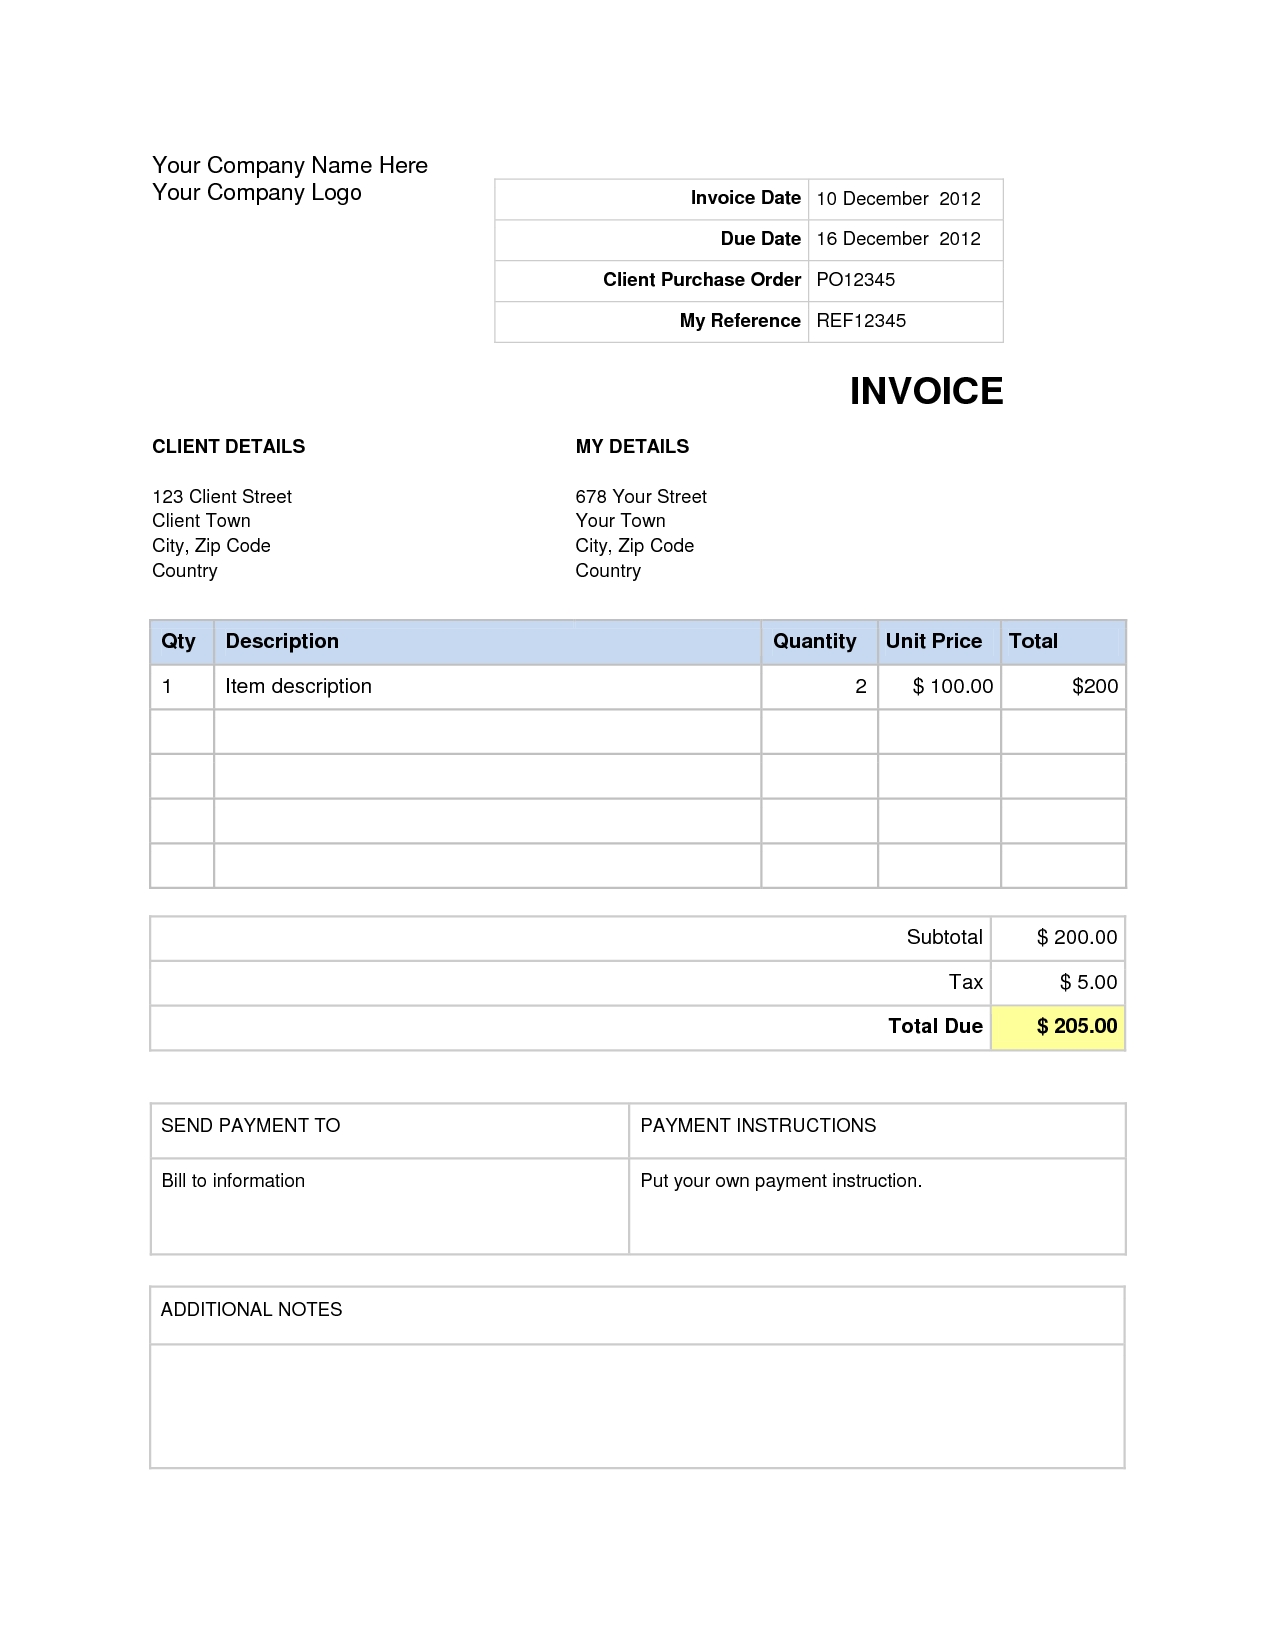 ms word commercial invoice template